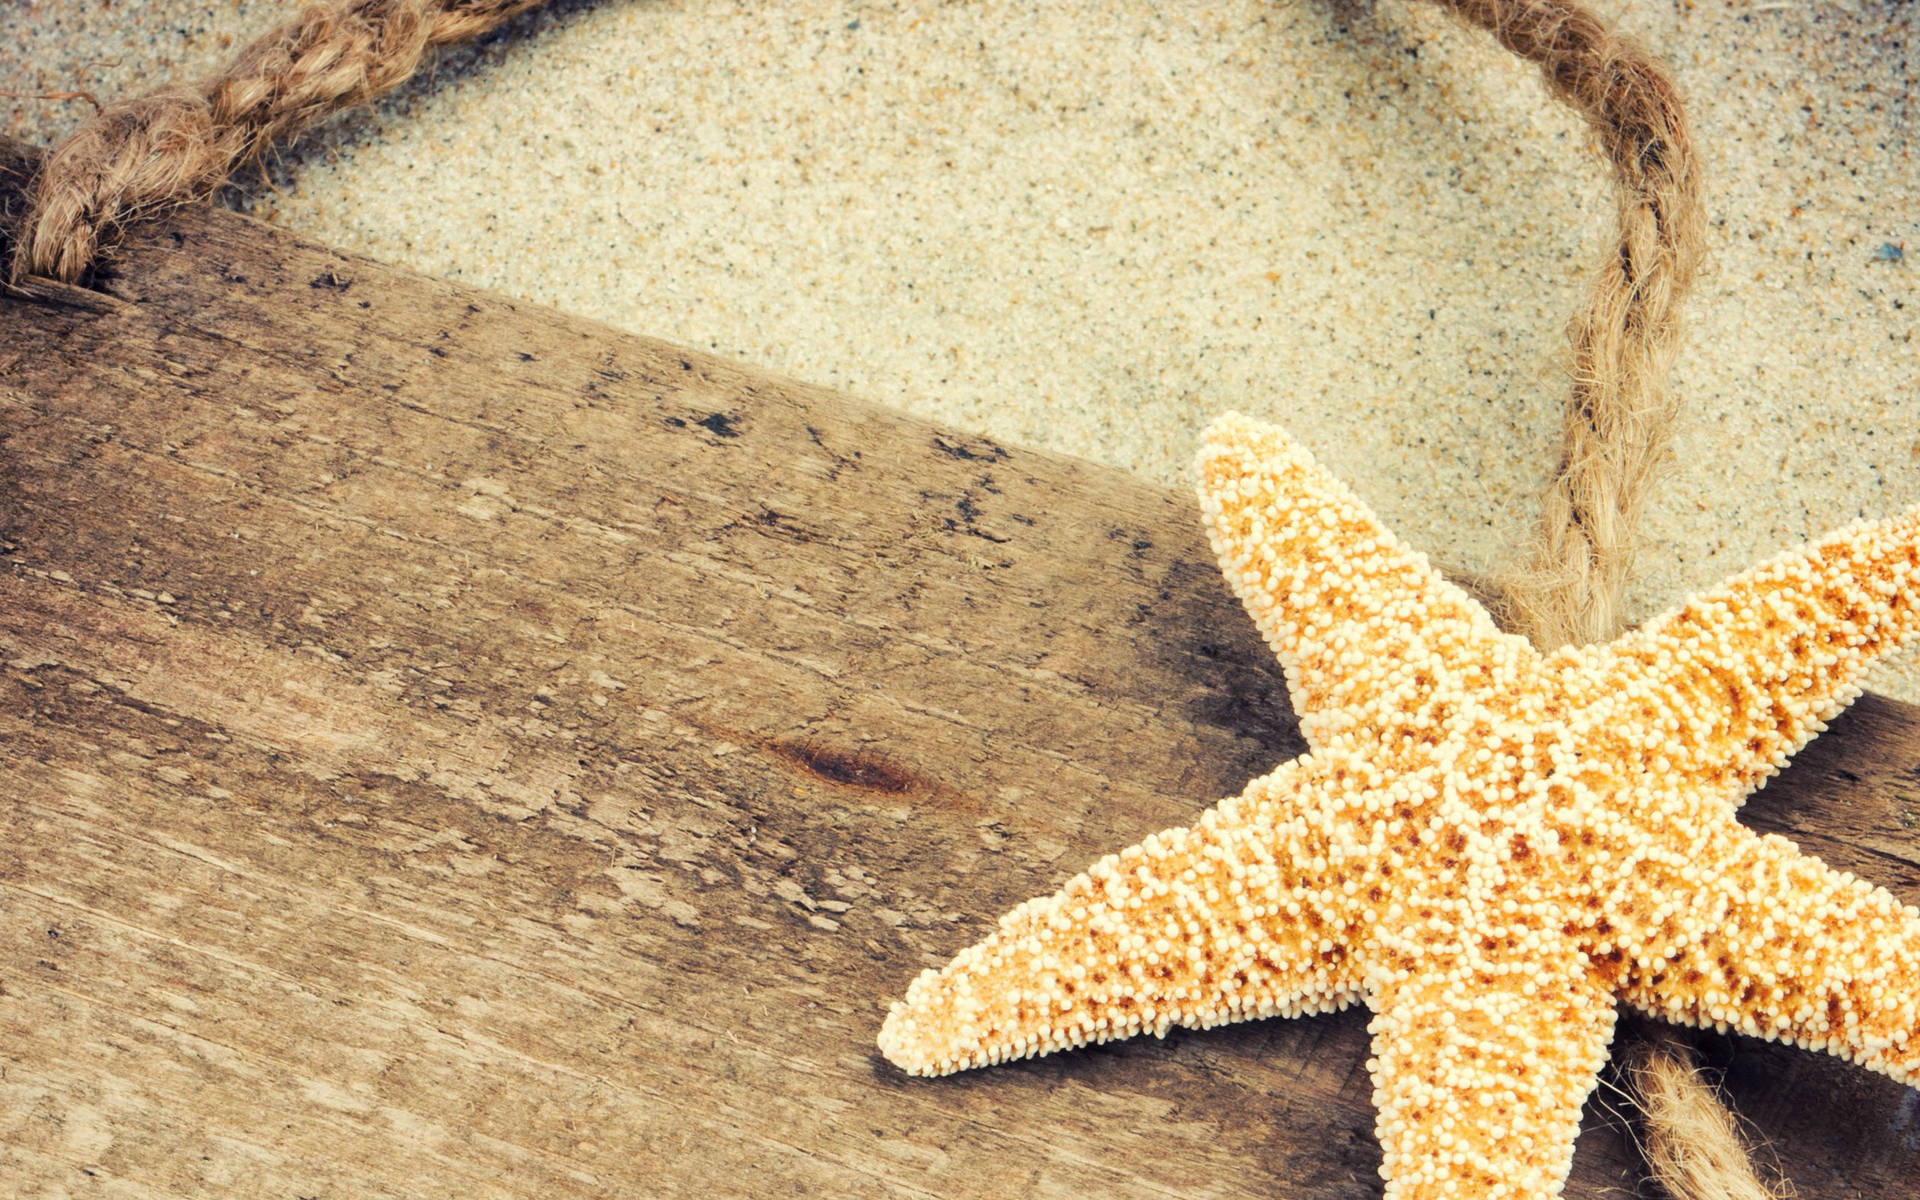 A Vibrant Yellow Starfish Resting on Wooden Surface Wallpaper